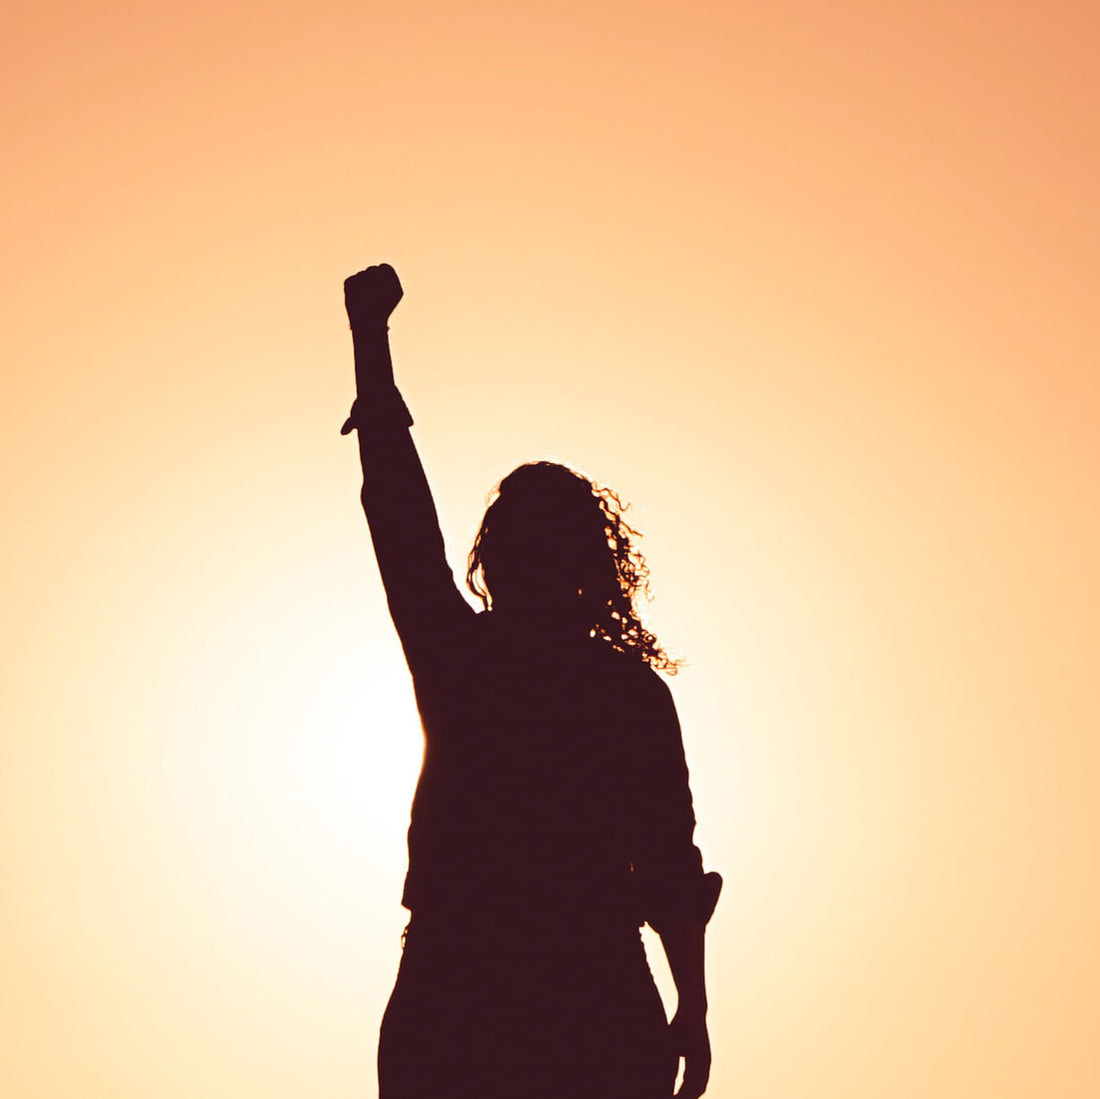 Woman raising her hand towards the sky in the sunset.